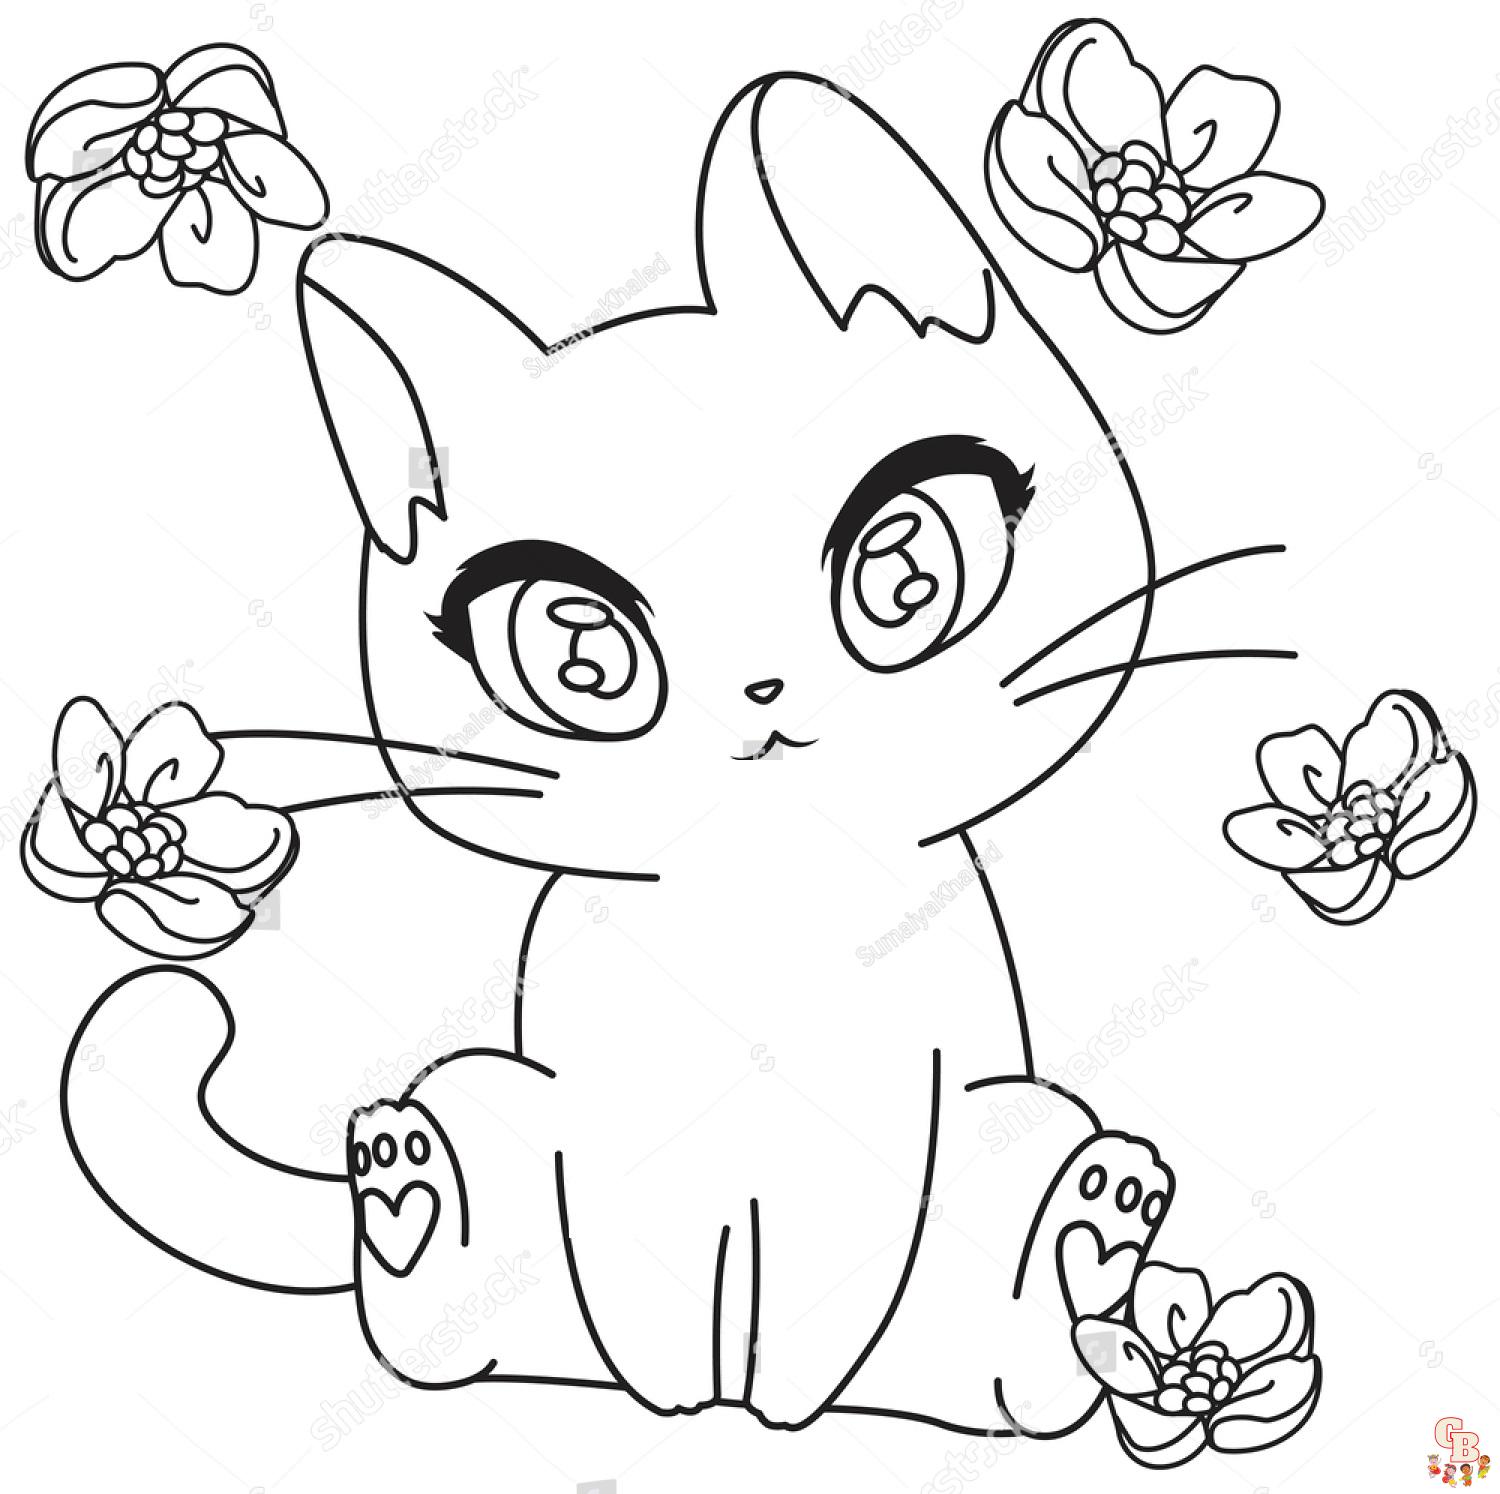 Ichigo from Mew-mew anime coloring pages for kids, printable free |  coloing-4kids.com